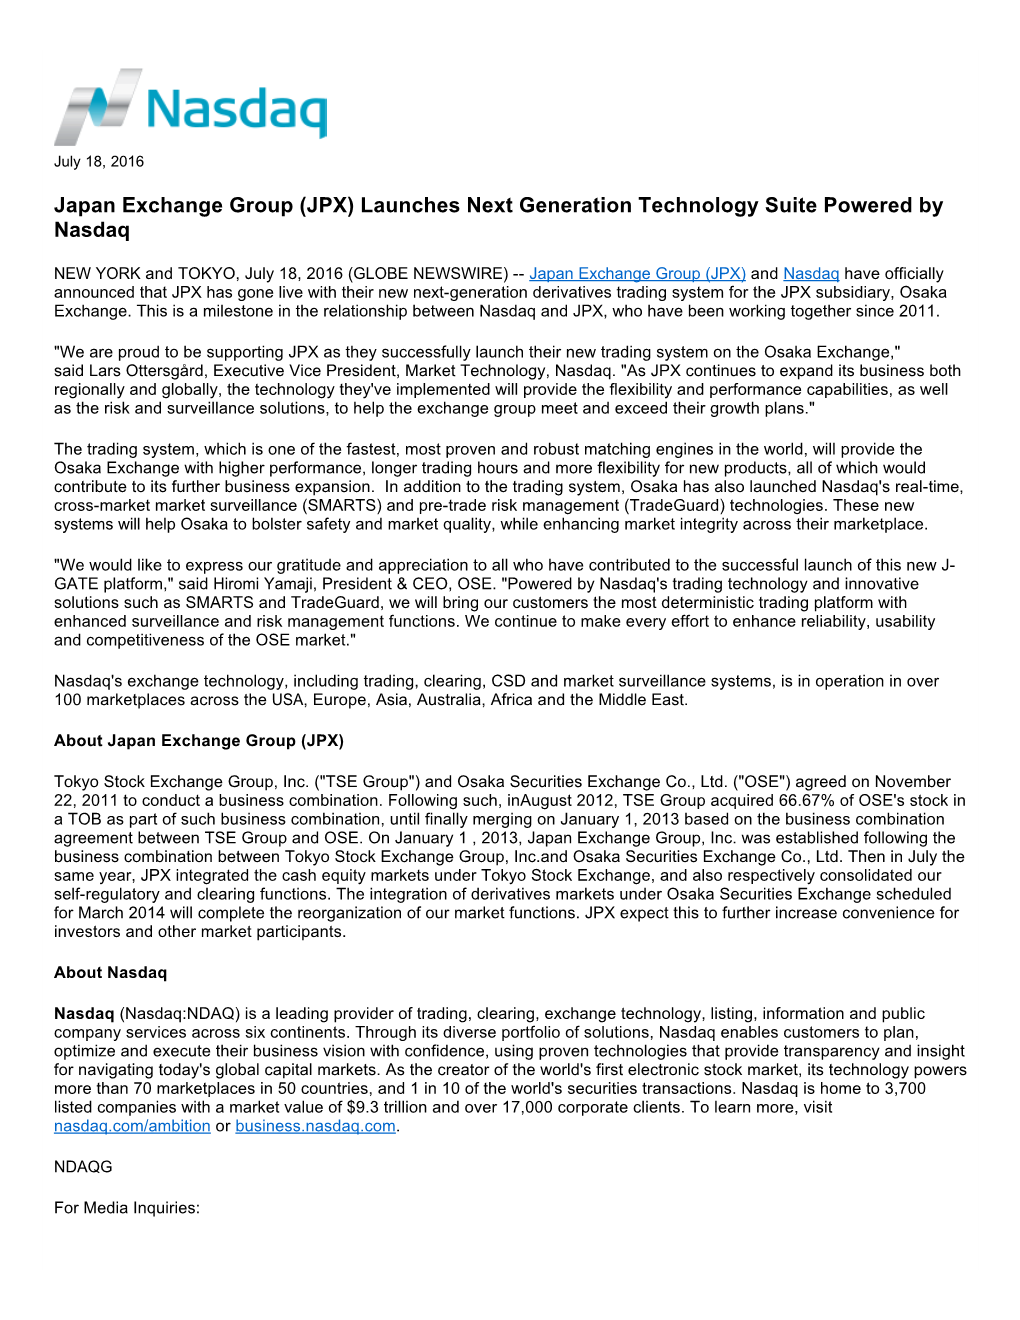 Japan Exchange Group (JPX) Launches Next Generation Technology Suite Powered by Nasdaq